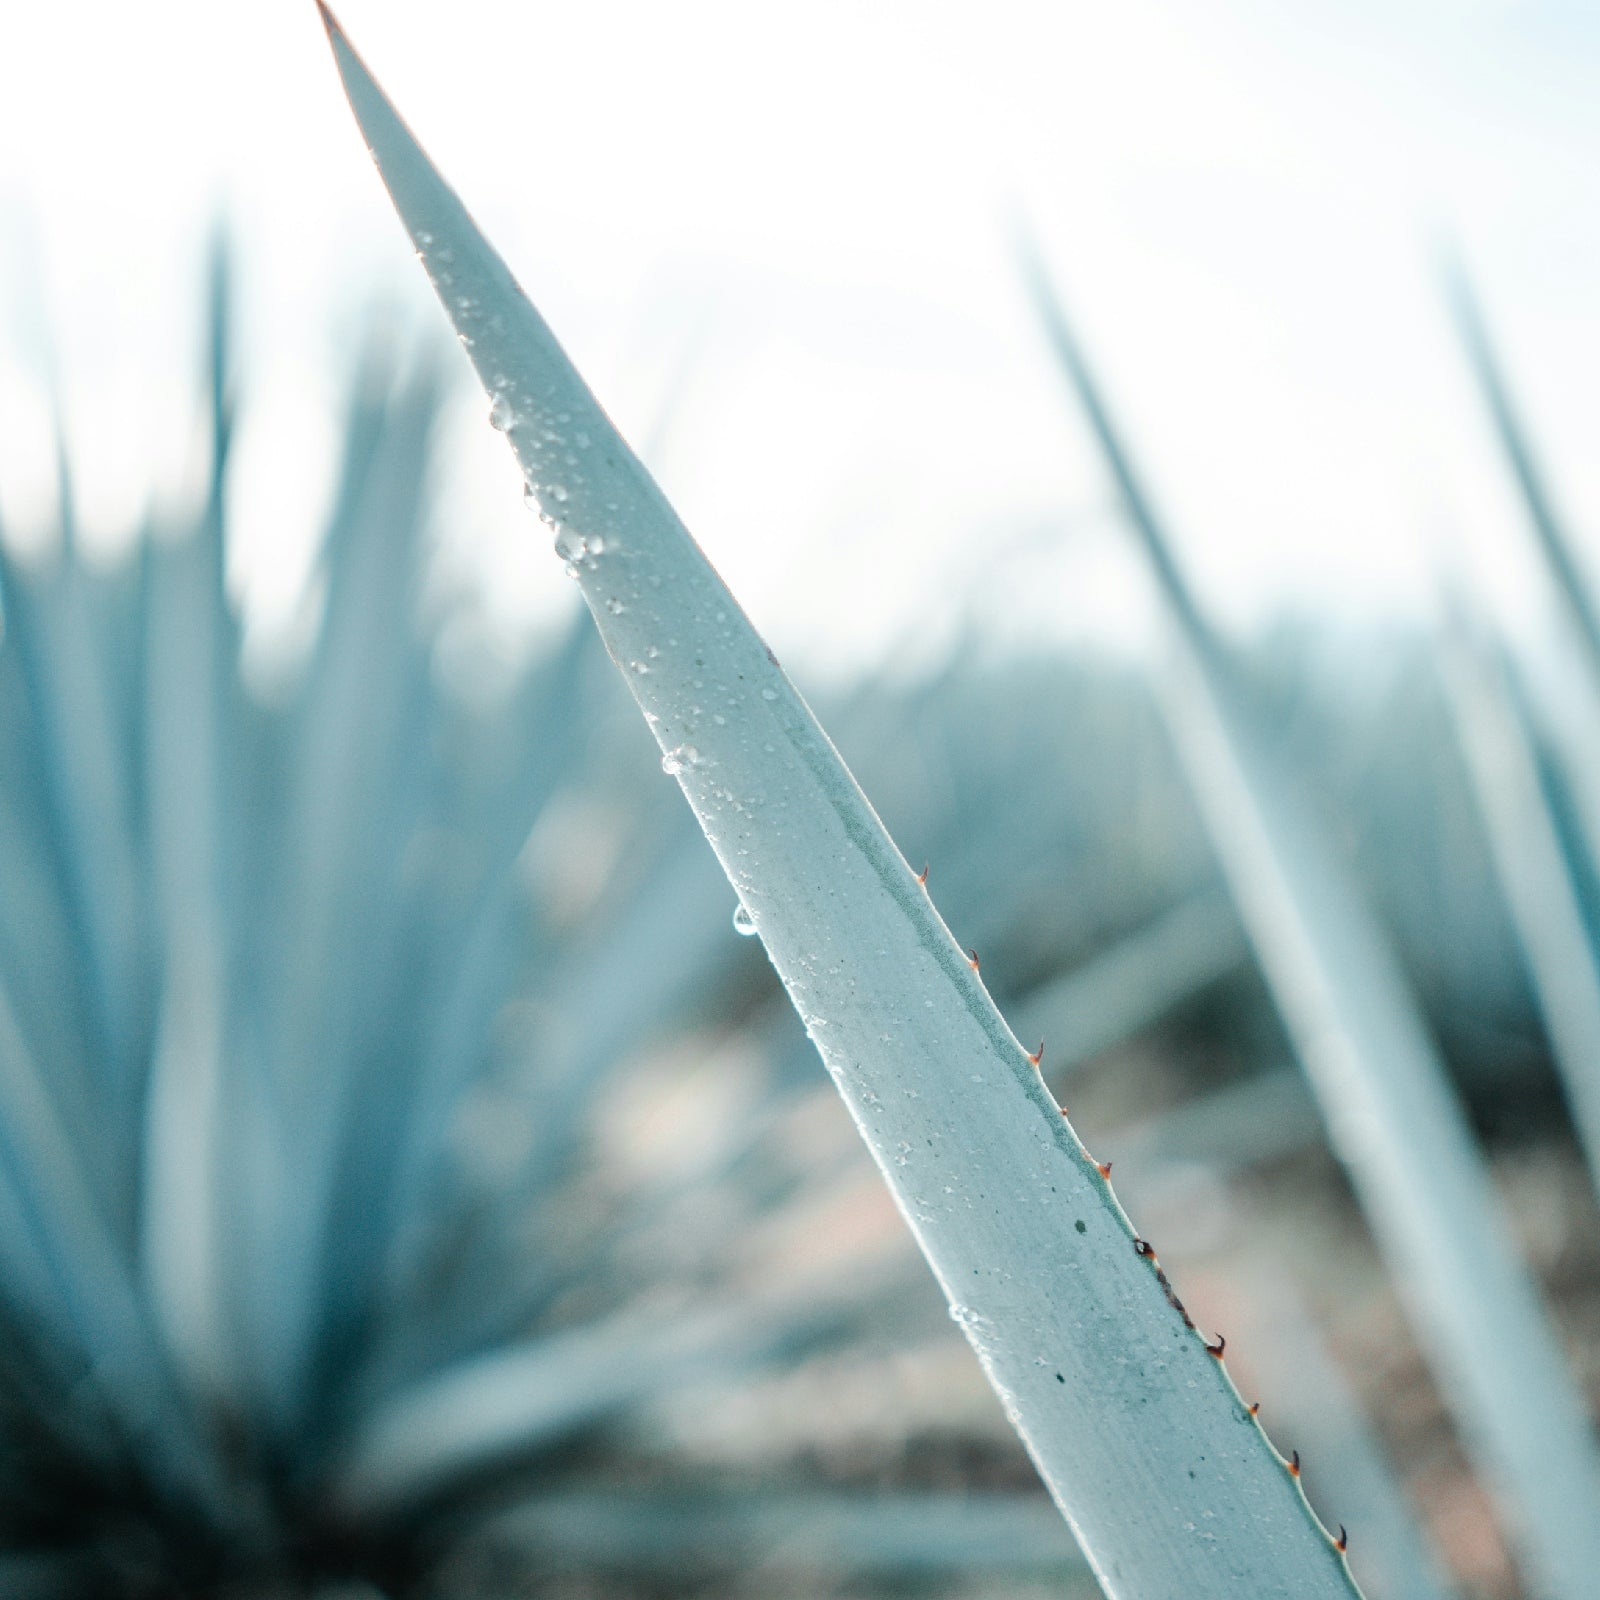 A blue agave plant.